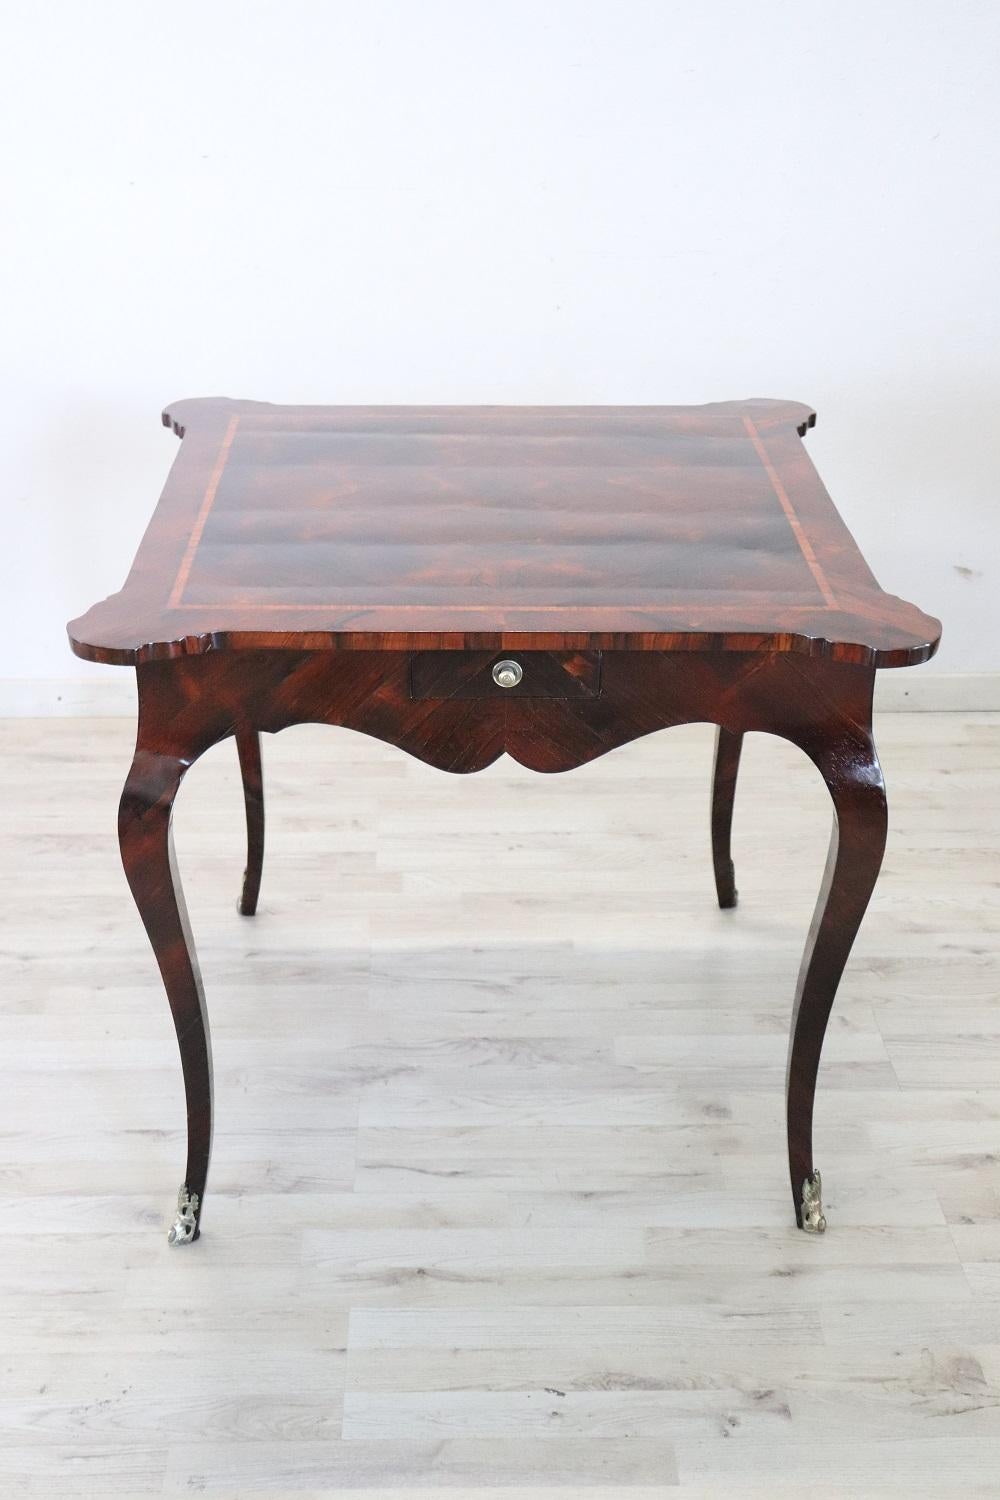 This fantastic antique game table is a true cabinet-making masterpiece. Dated around the mid-18th century in the Louis XV era, it reflects all its characteristics. Made using briar and inlays of precious woods such as rosewood and violet wood. The